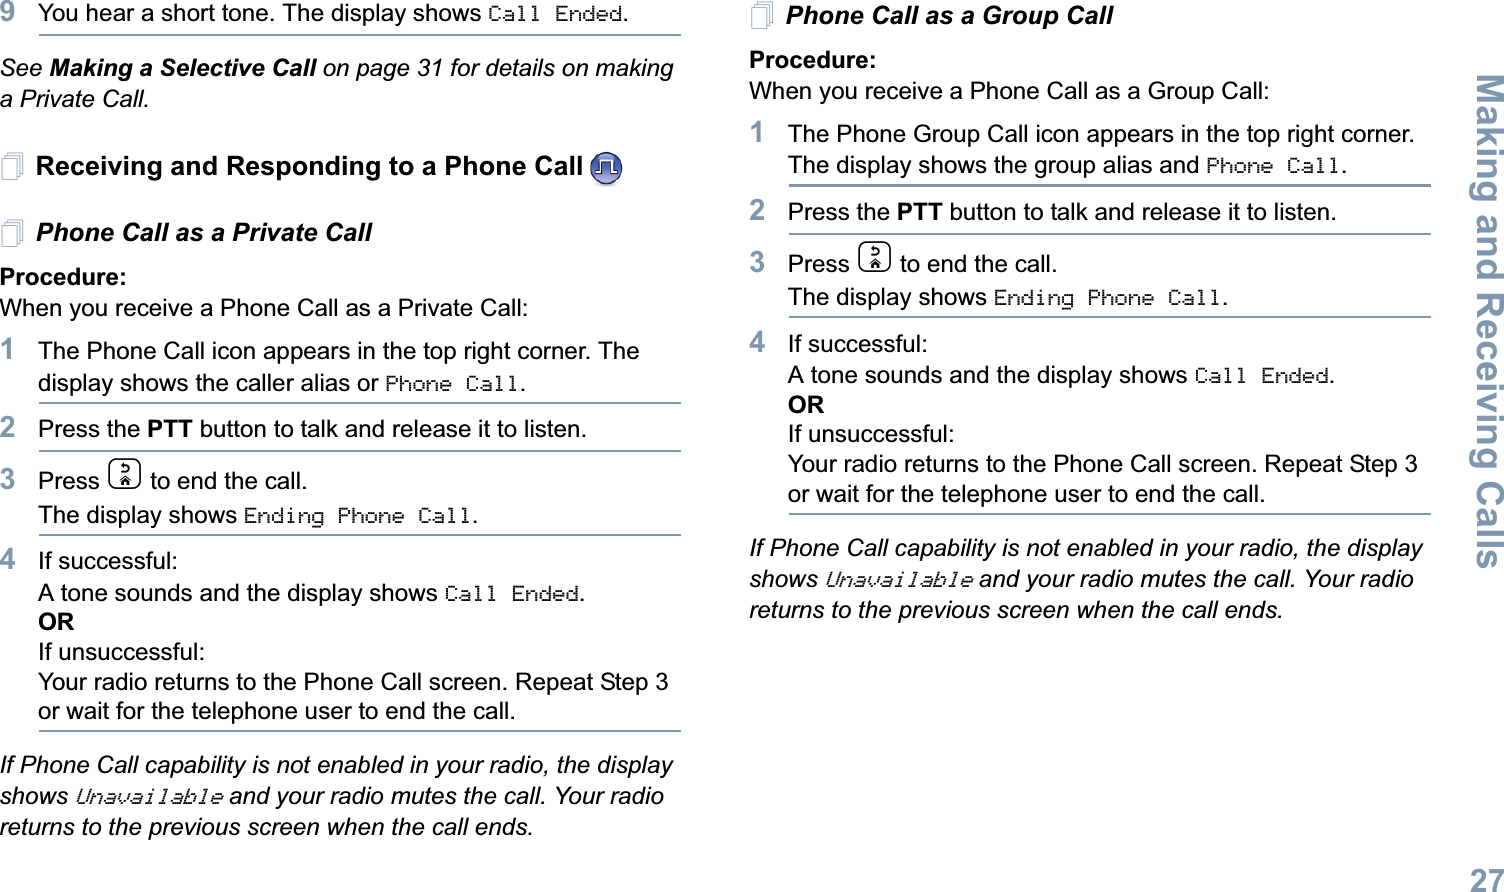 Making and Receiving CallsEnglish279You hear a short tone. The display shows Call Ended.See Making a Selective Call on page 31 for details on making a Private Call.Receiving and Responding to a Phone CallPhone Call as a Private Call Procedure:When you receive a Phone Call as a Private Call:1The Phone Call icon appears in the top right corner. The display shows the caller alias or Phone Call.2Press the PTT button to talk and release it to listen. 3Press d to end the call.The display shows Ending Phone Call.4If successful:A tone sounds and the display shows Call Ended. ORIf unsuccessful:Your radio returns to the Phone Call screen. Repeat Step 3 or wait for the telephone user to end the call.If Phone Call capability is not enabled in your radio, the display shows Unavailable and your radio mutes the call. Your radio returns to the previous screen when the call ends.Phone Call as a Group Call Procedure:When you receive a Phone Call as a Group Call:1The Phone Group Call icon appears in the top right corner. The display shows the group alias and Phone Call.2Press the PTT button to talk and release it to listen.3Press d to end the call.The display shows Ending Phone Call.4If successful:A tone sounds and the display shows Call Ended. ORIf unsuccessful:Your radio returns to the Phone Call screen. Repeat Step 3 or wait for the telephone user to end the call.If Phone Call capability is not enabled in your radio, the display shows Unavailable and your radio mutes the call. Your radio returns to the previous screen when the call ends.